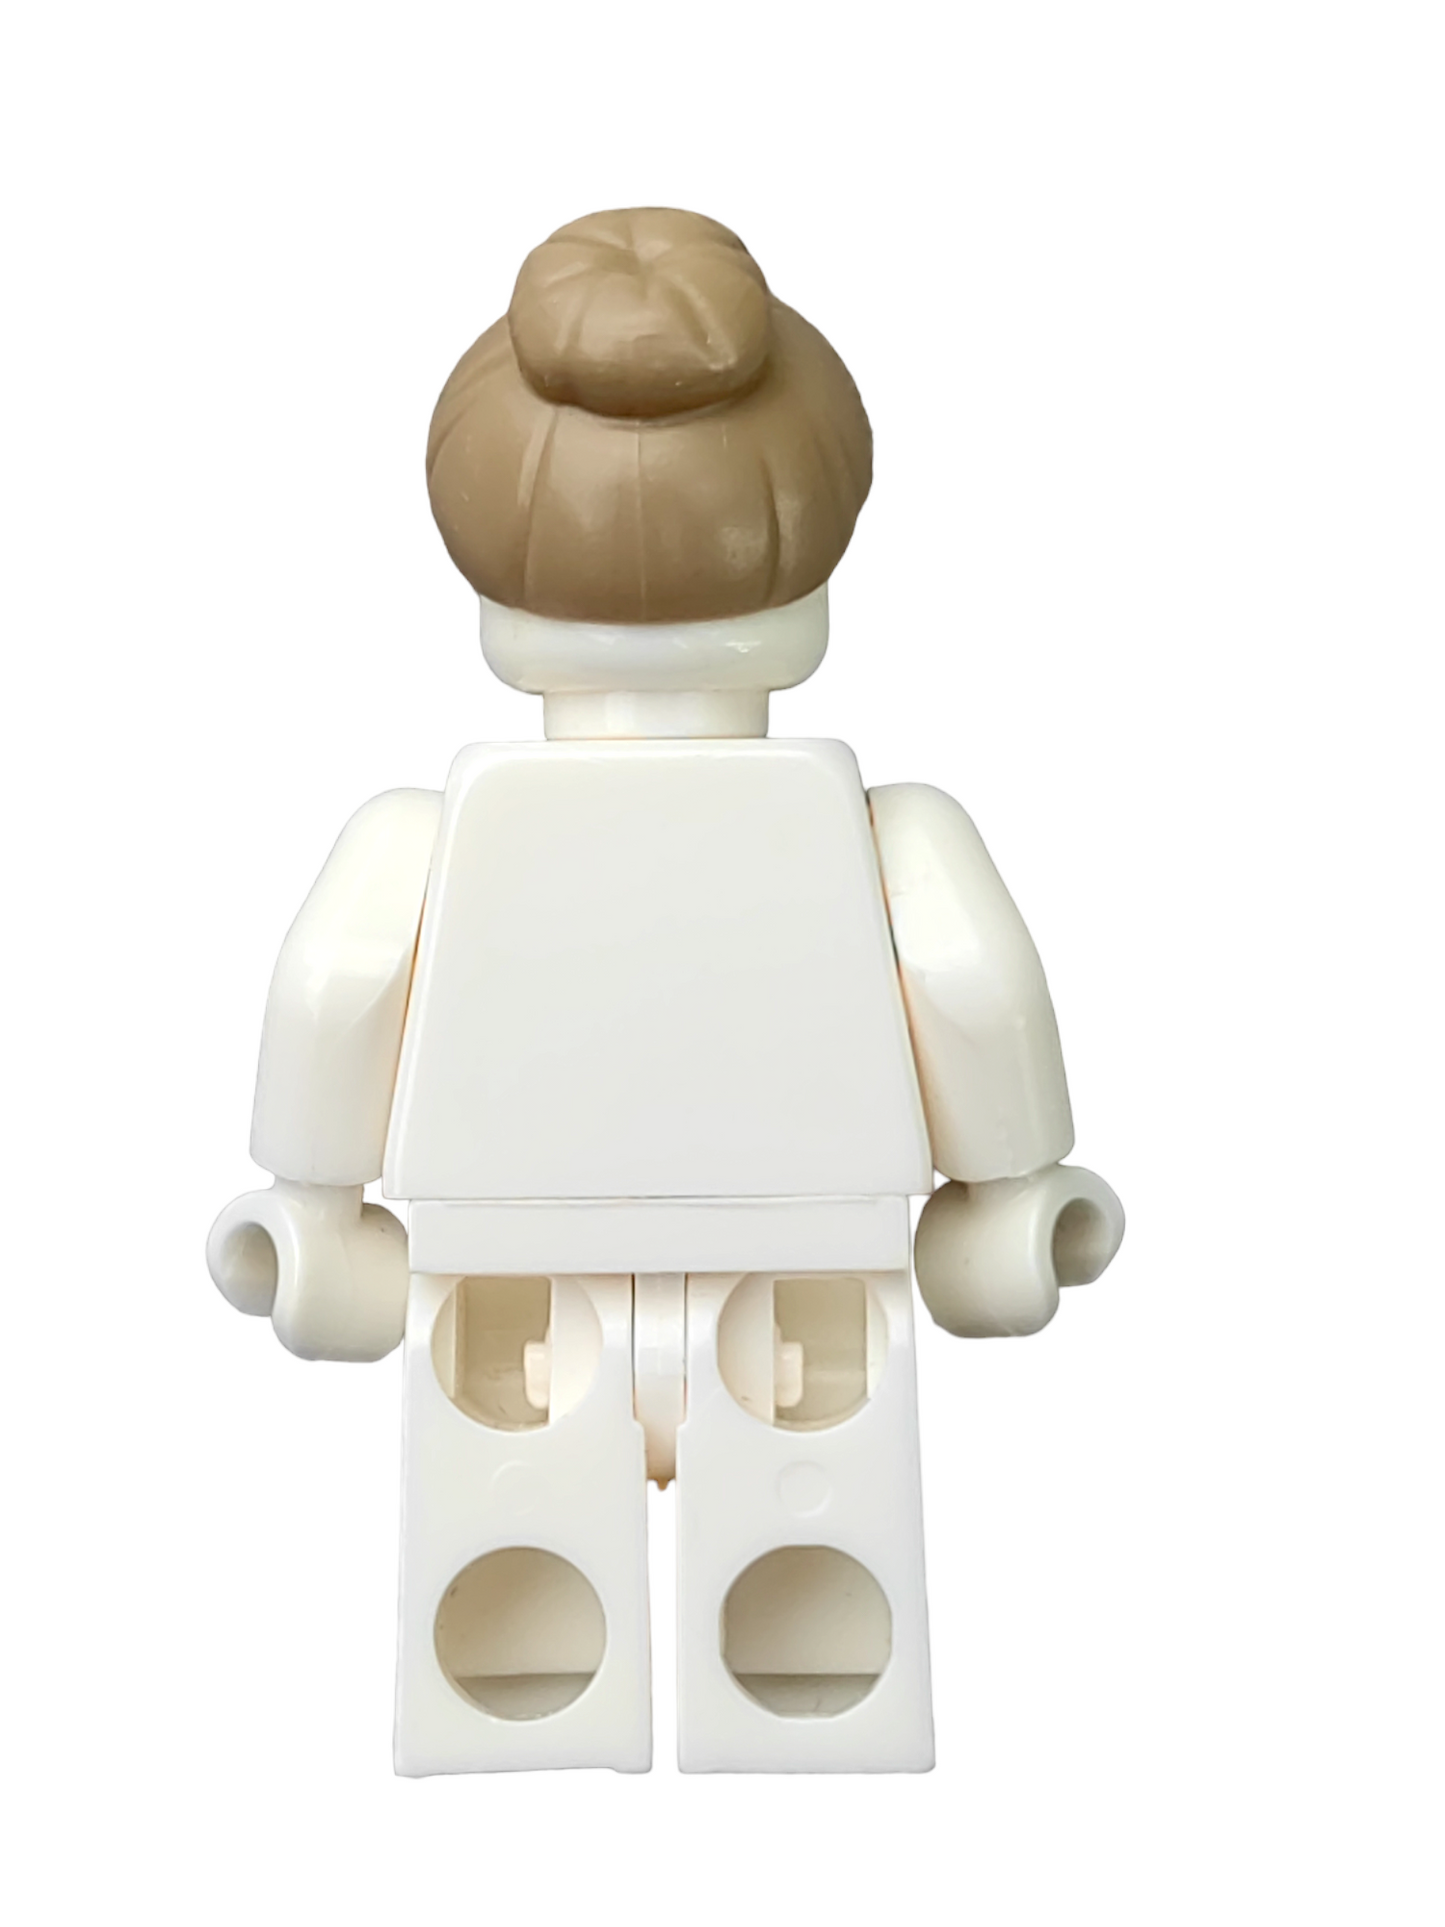 LEGO Wig, Brown  Hair with a Bun Knot at the Top - UB1316